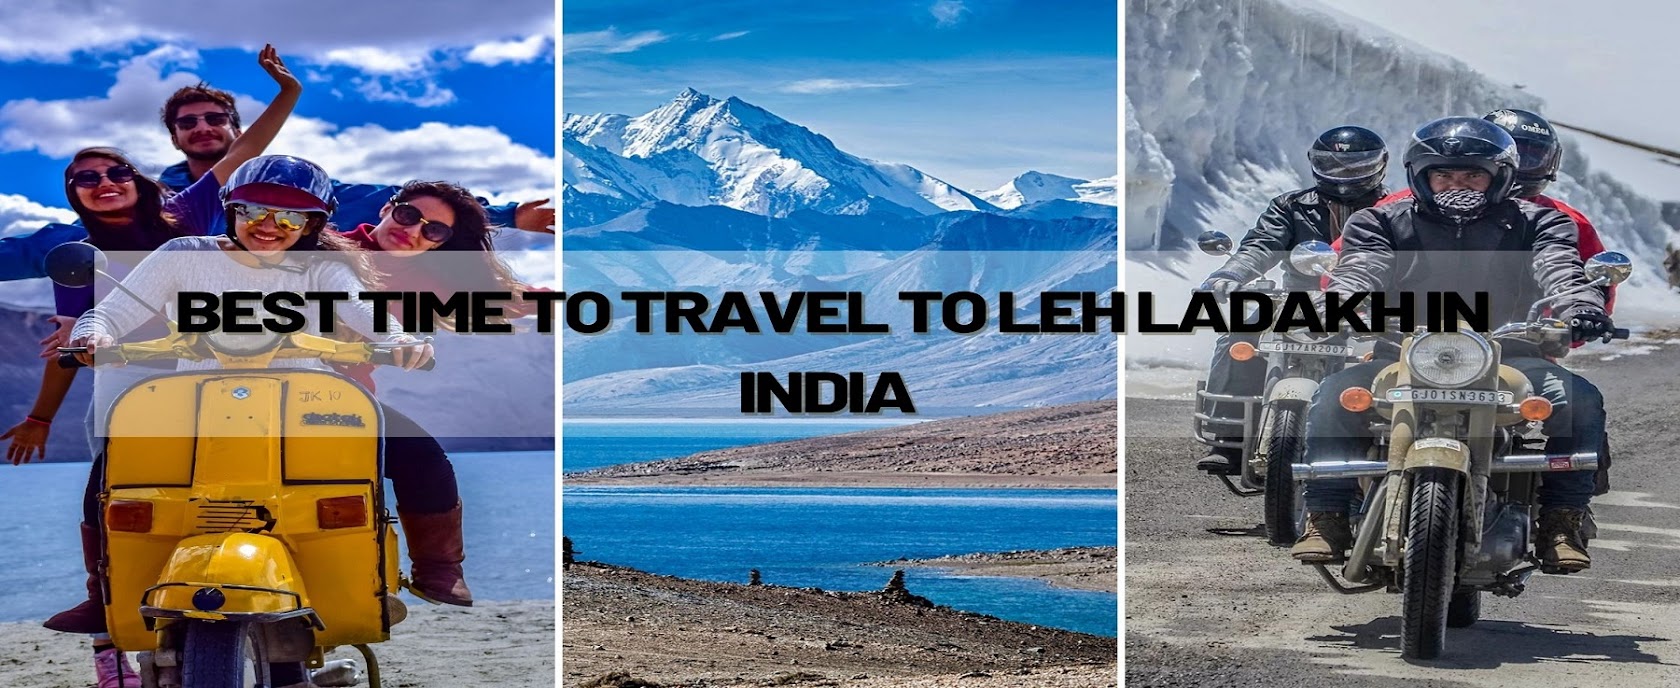 best time to tour leh